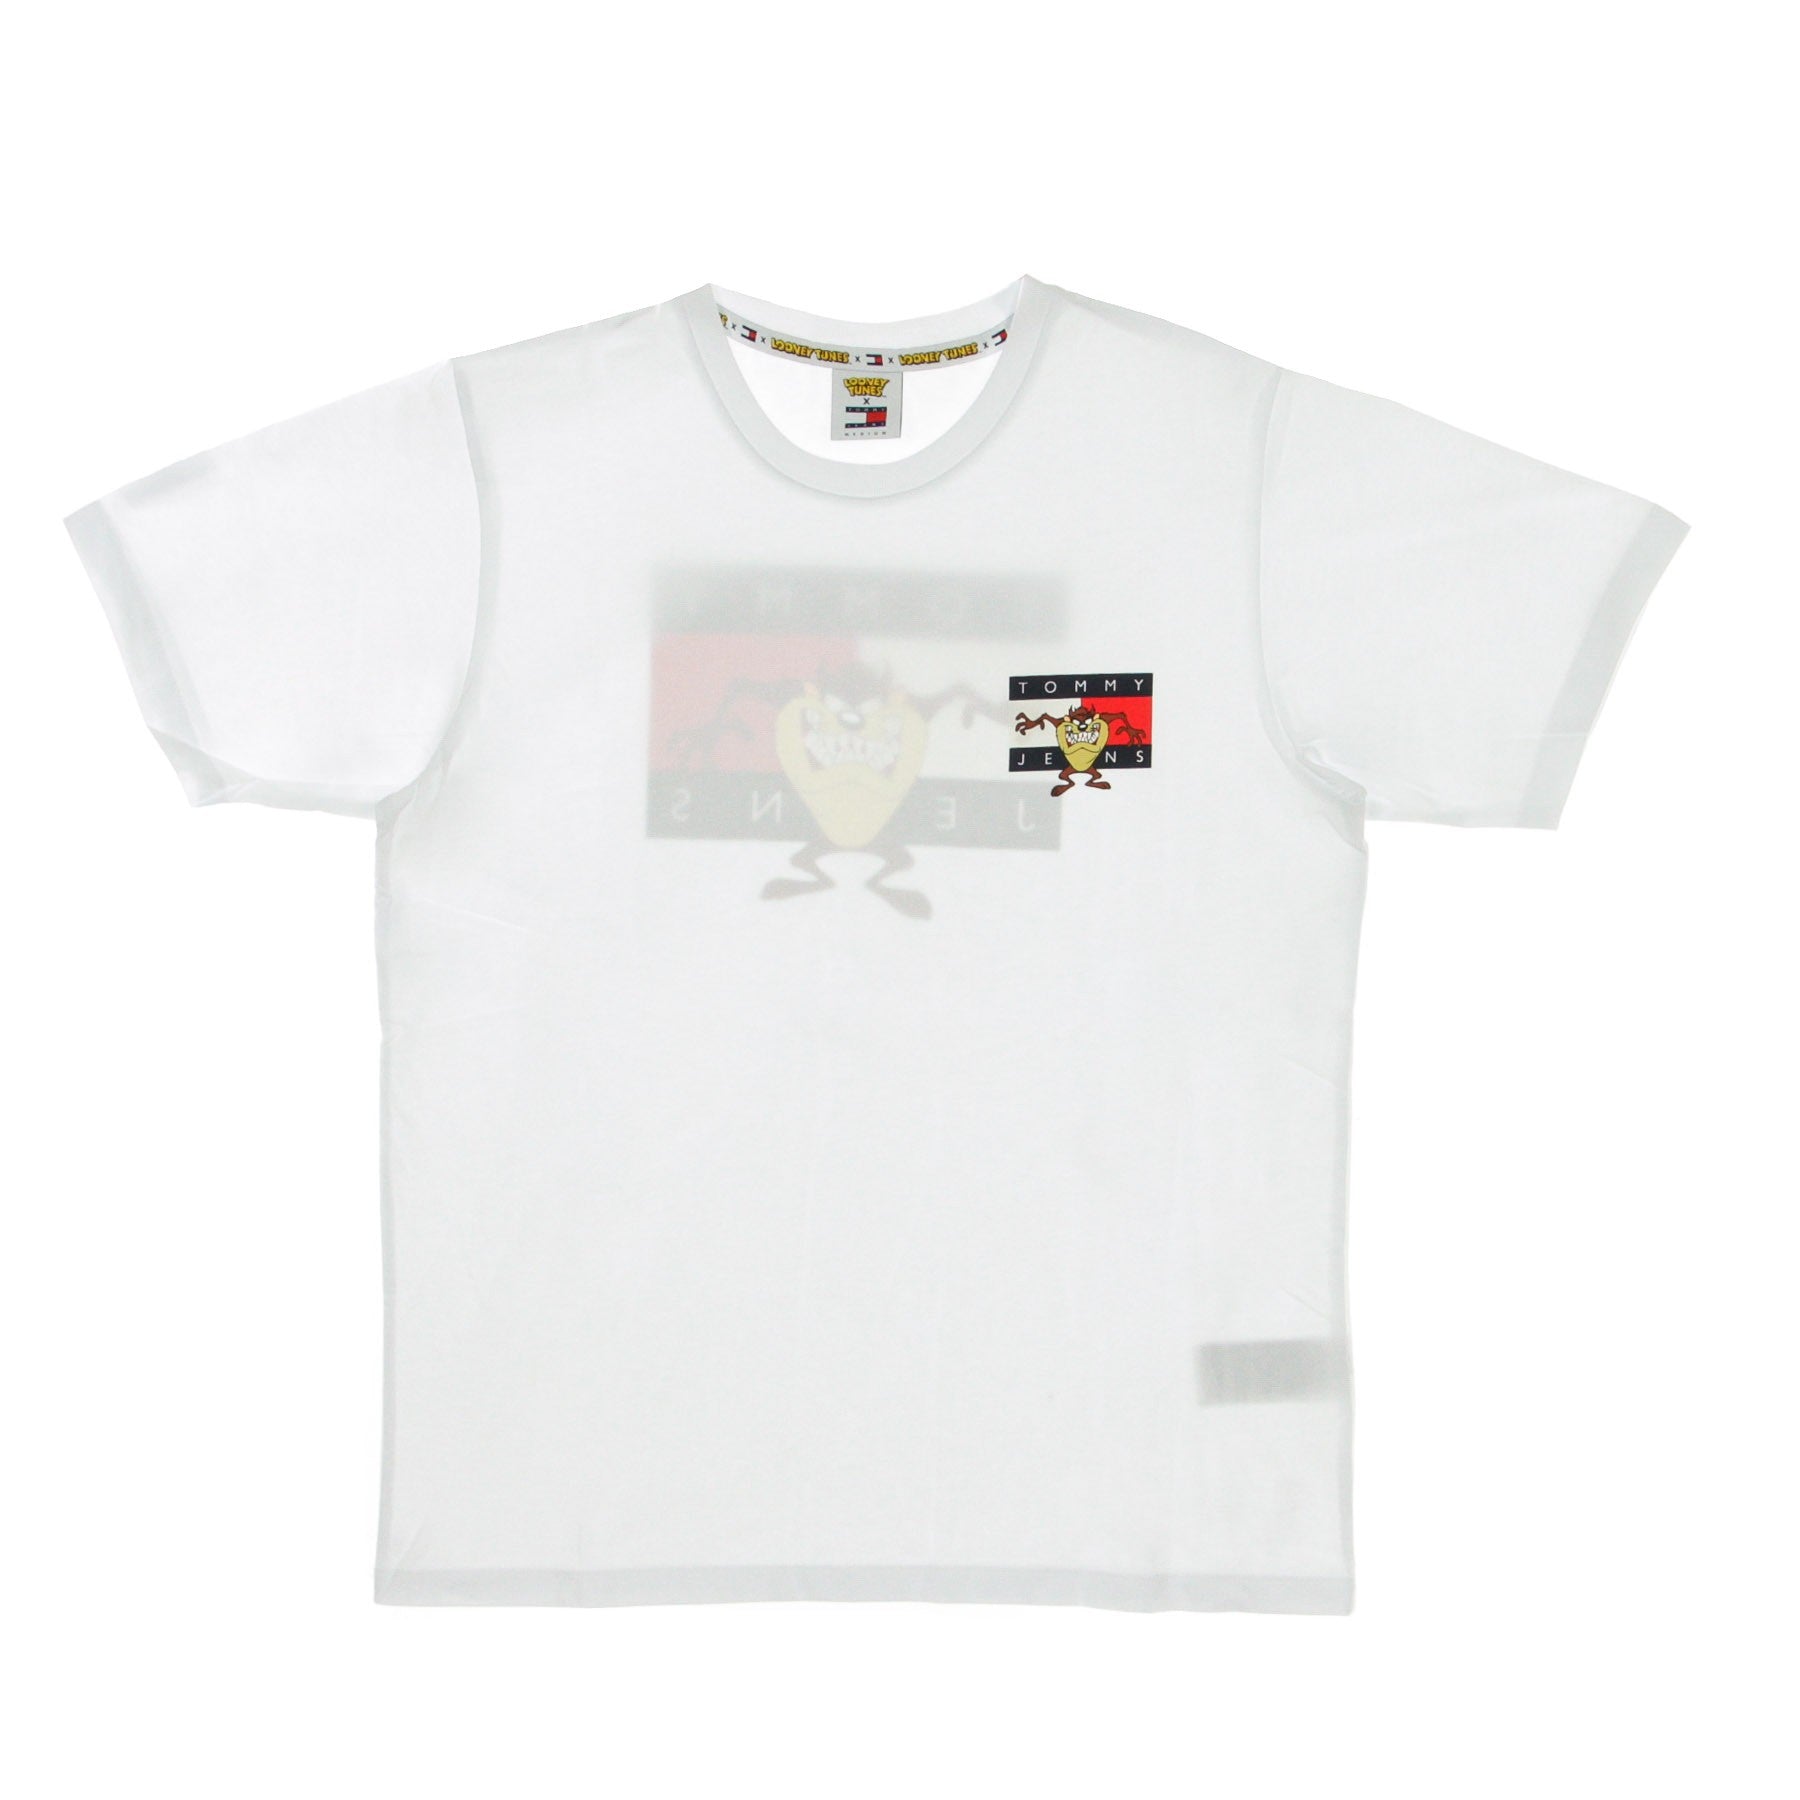 Tommy Tee X Looney Tunes White Men's T-Shirt